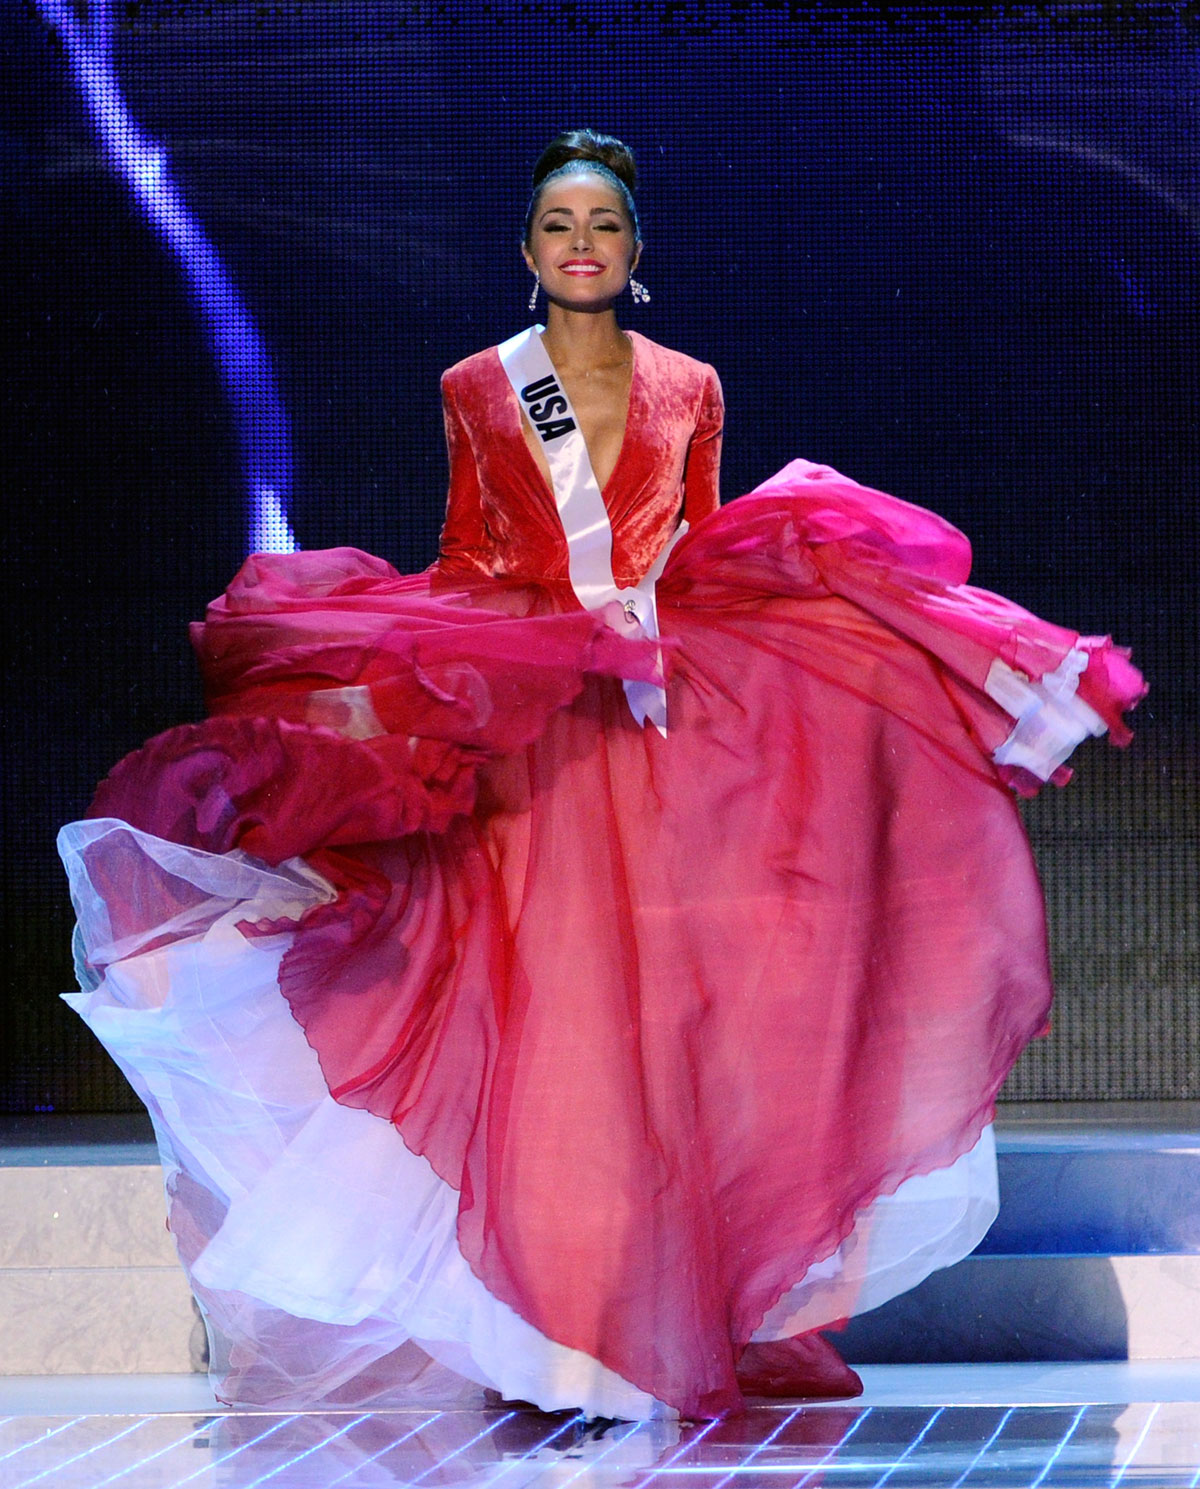 OLIVIA-CULPO-as-Miss-Universe-at-the-2012-Miss-Universe-Pageant-in-Las-Vegas-6.jpg